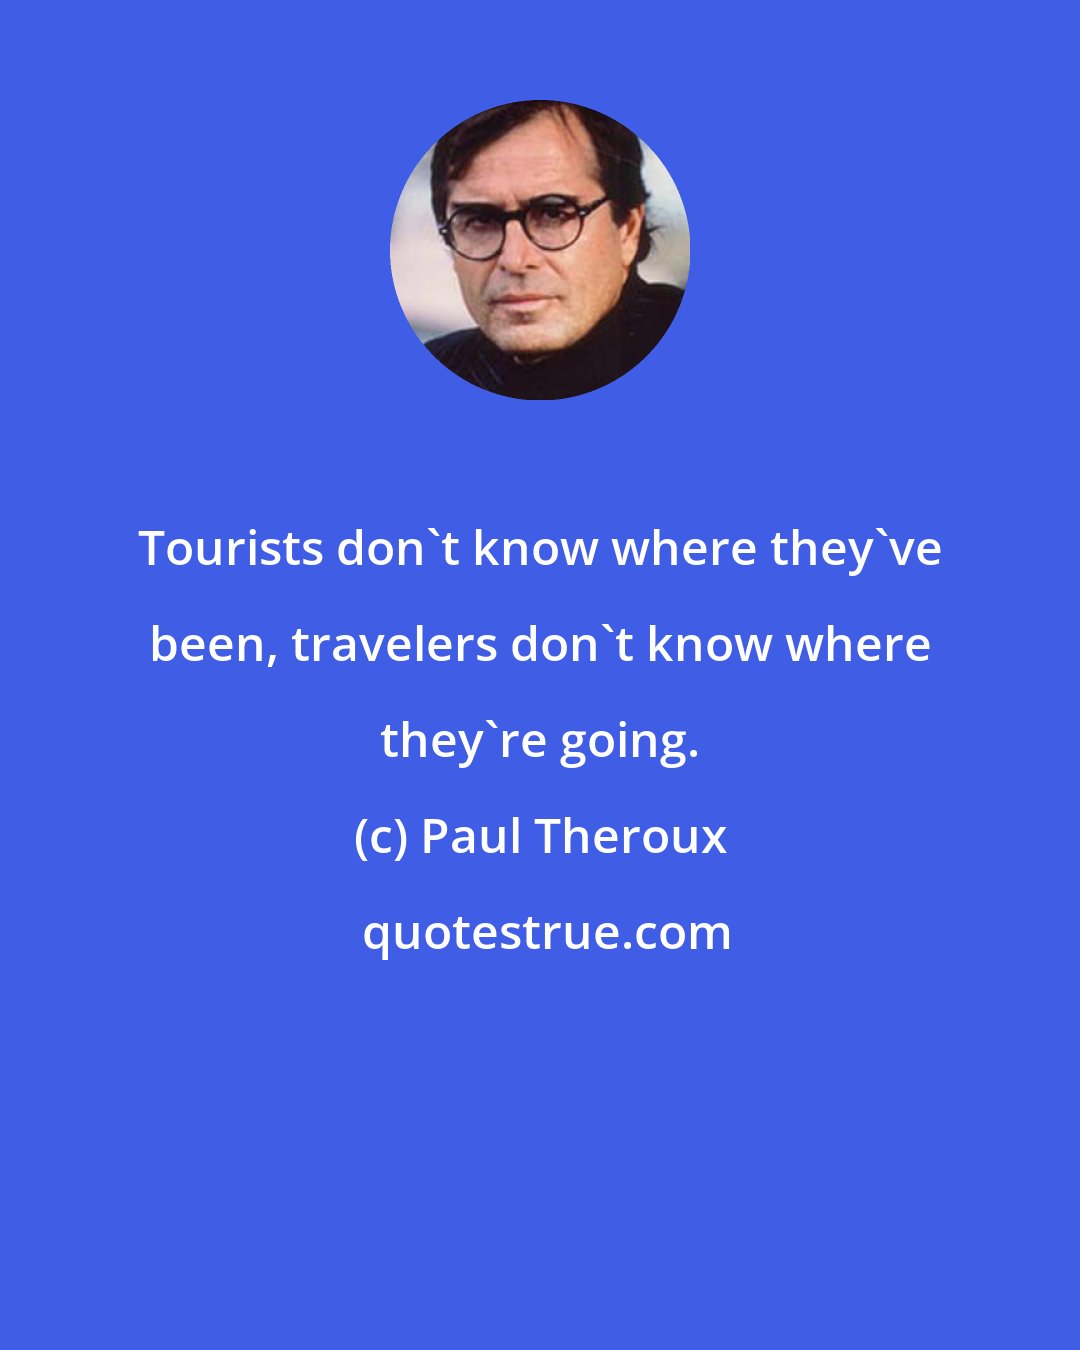 Paul Theroux: Tourists don't know where they've been, travelers don't know where they're going.